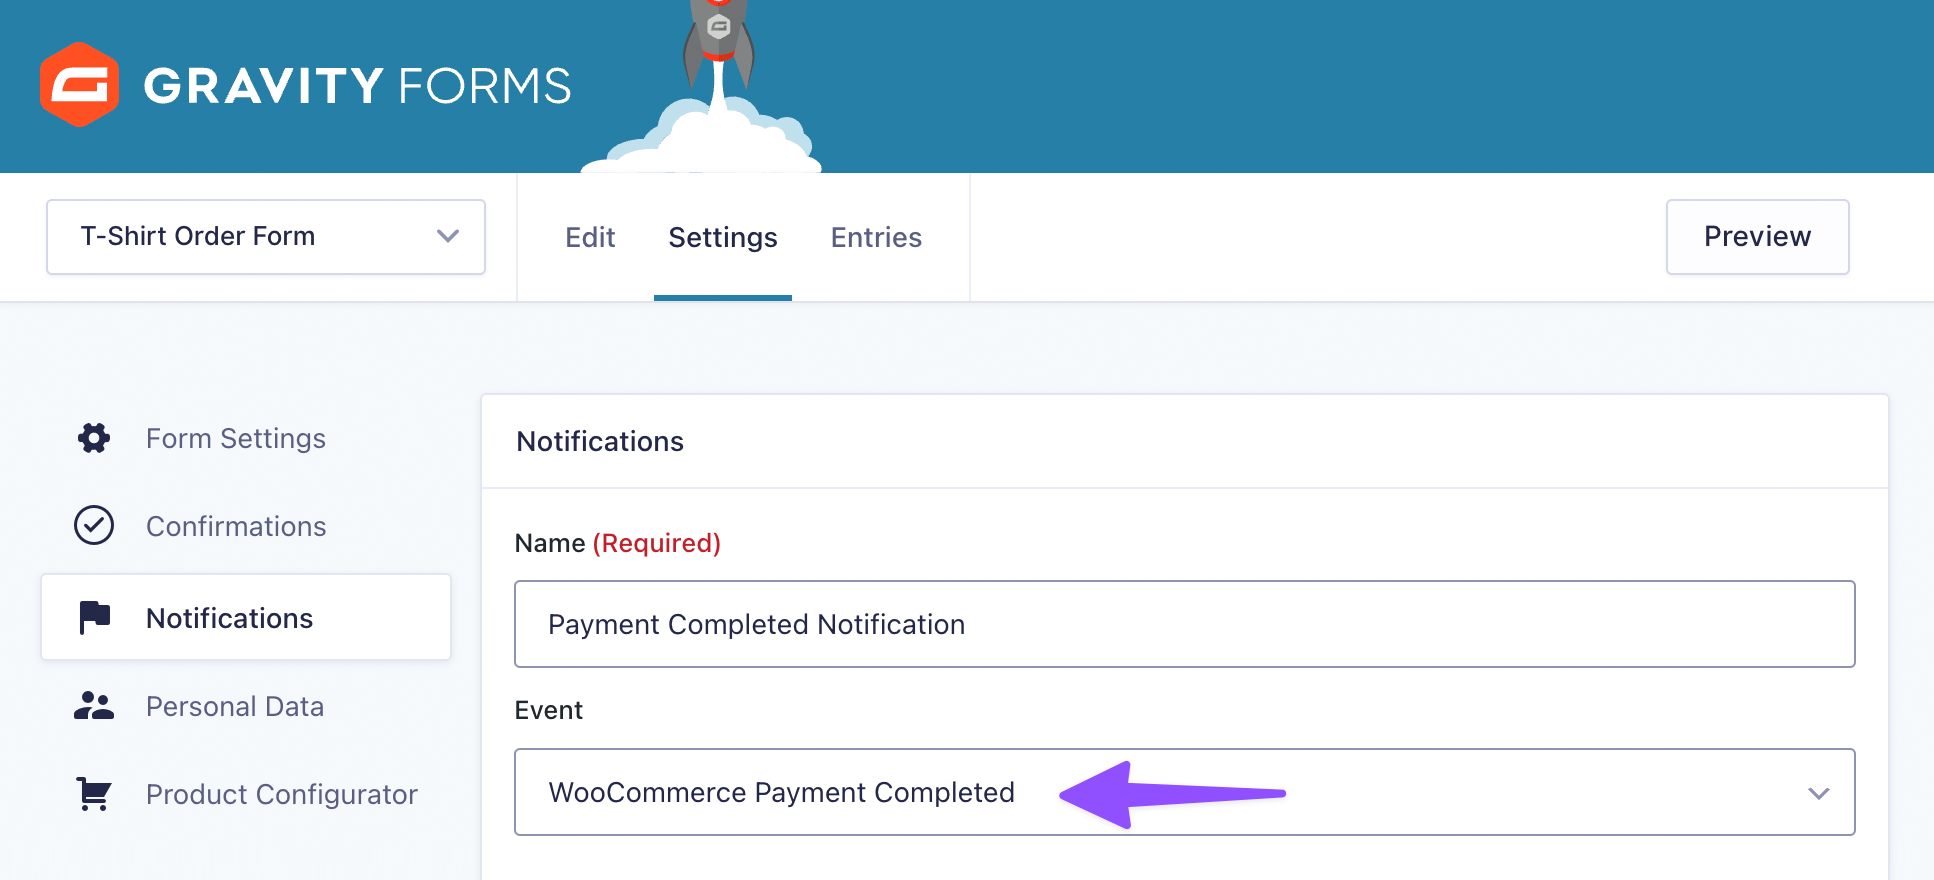 notification-event-wc-payment-completed